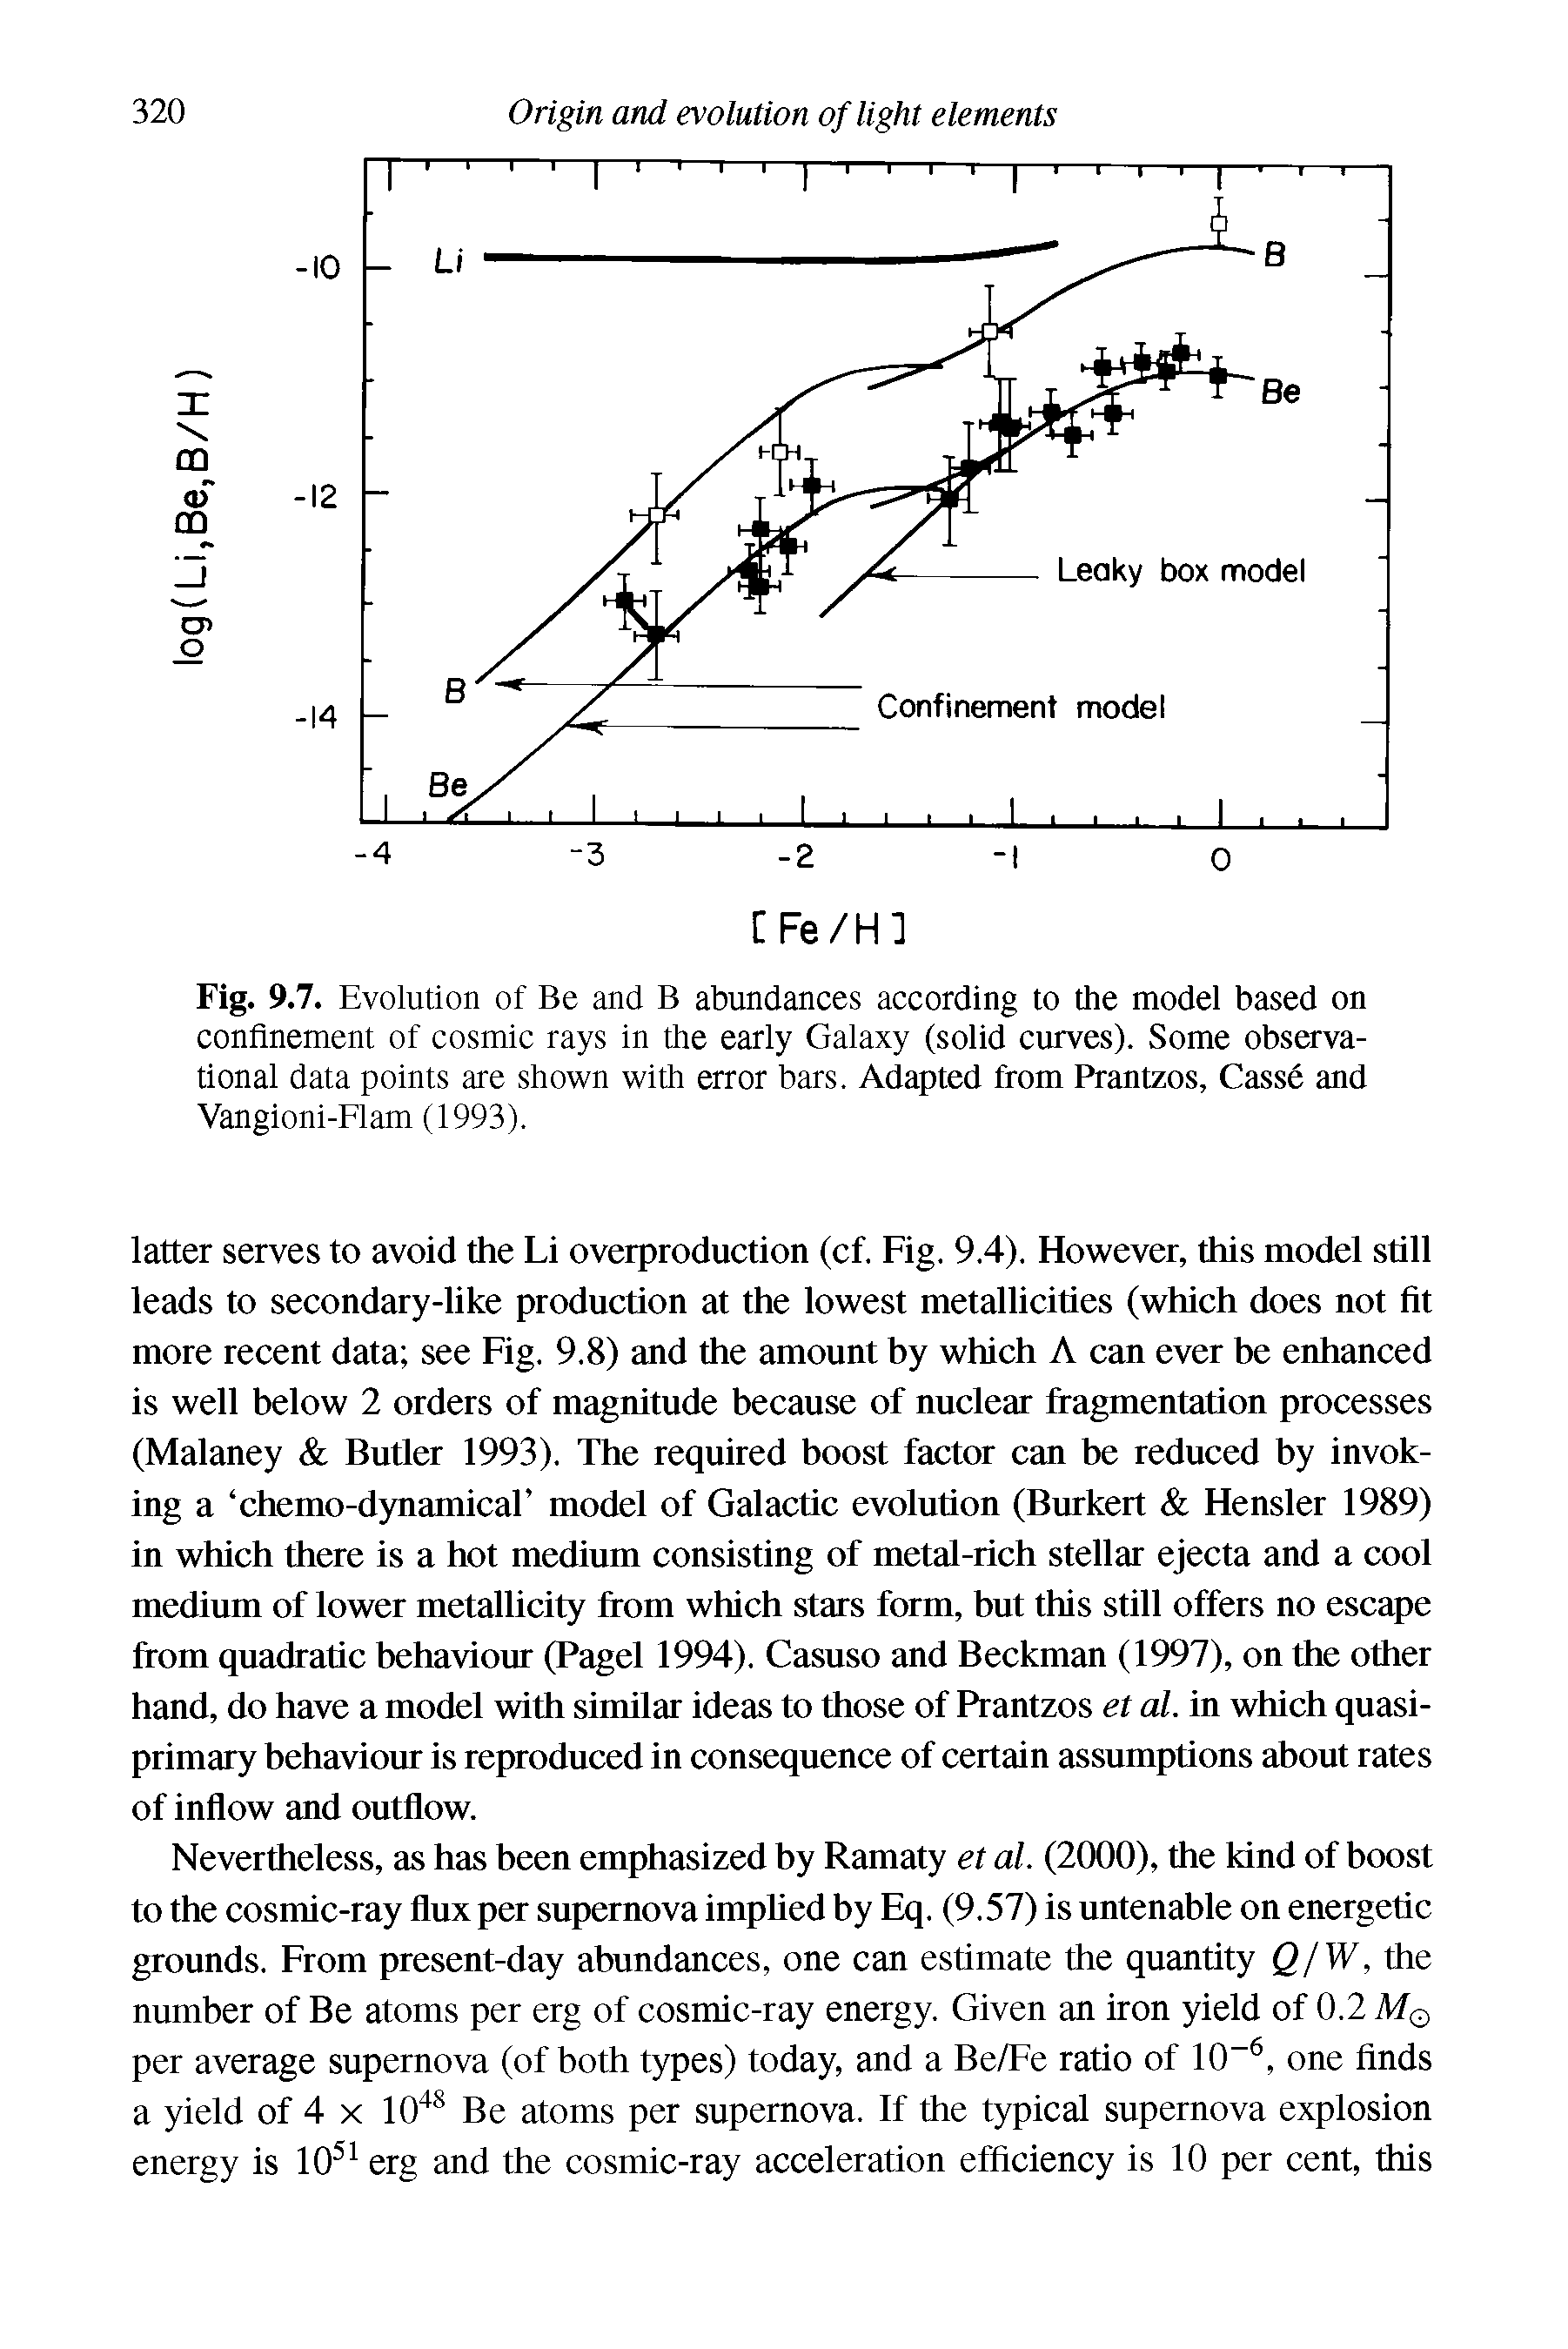 Fig. 9.7. Evolution of Be and B abundances according to the model based on confinement of cosmic rays in the early Galaxy (solid curves). Some observational data points are shown with error bars. Adapted from Prantzos, Casse and Vangioni-Flam (1993).